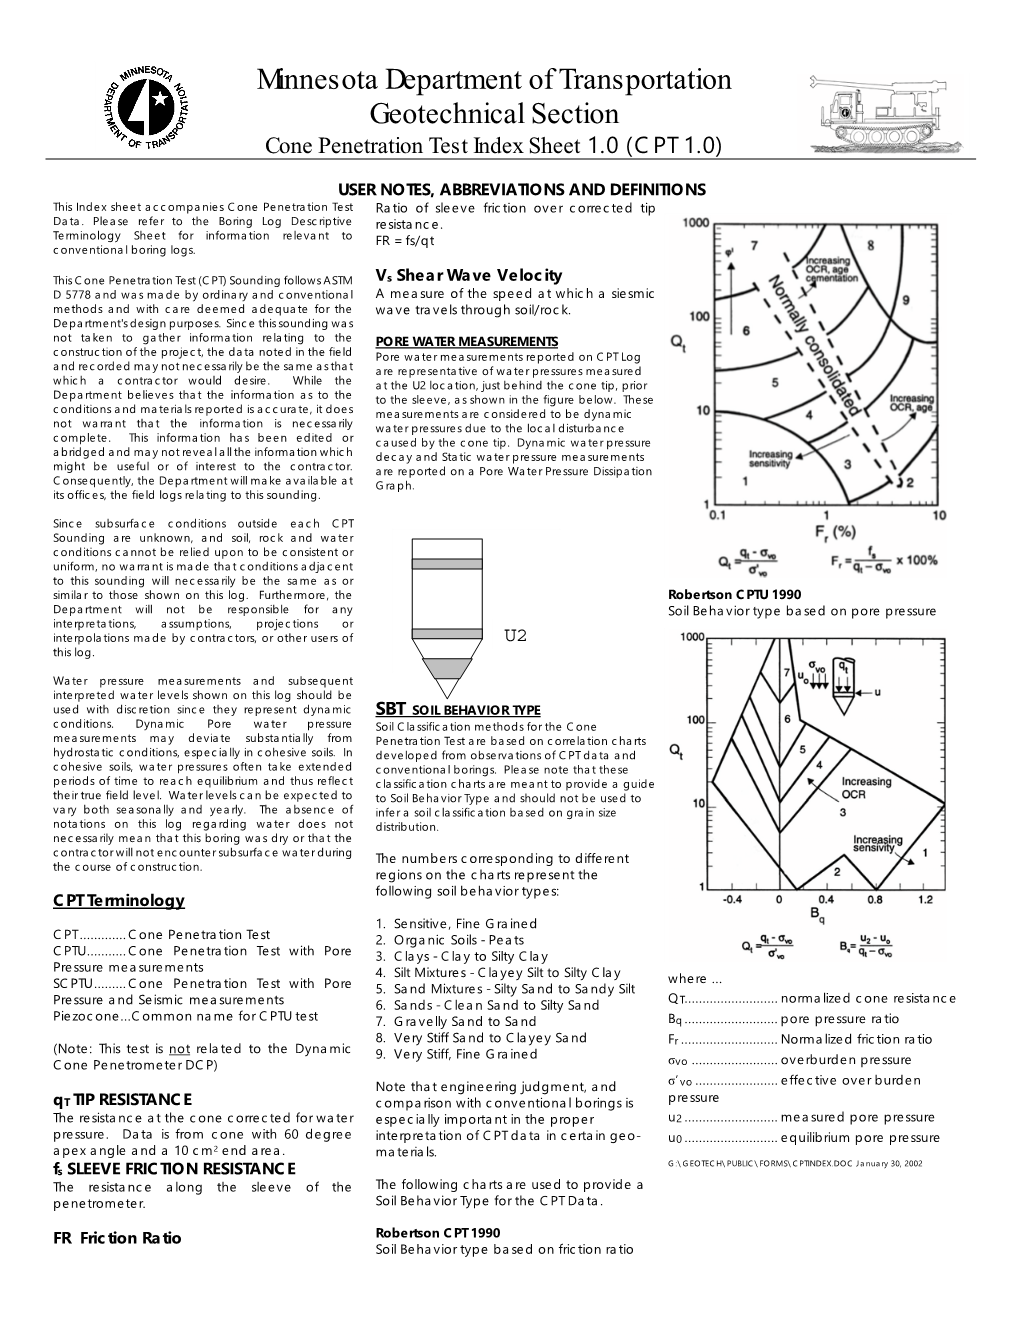 Minnesota Department of Transportation Geotechnical Section Cone Penetration Test Index Sheet 1.0 (CPT 1.0)